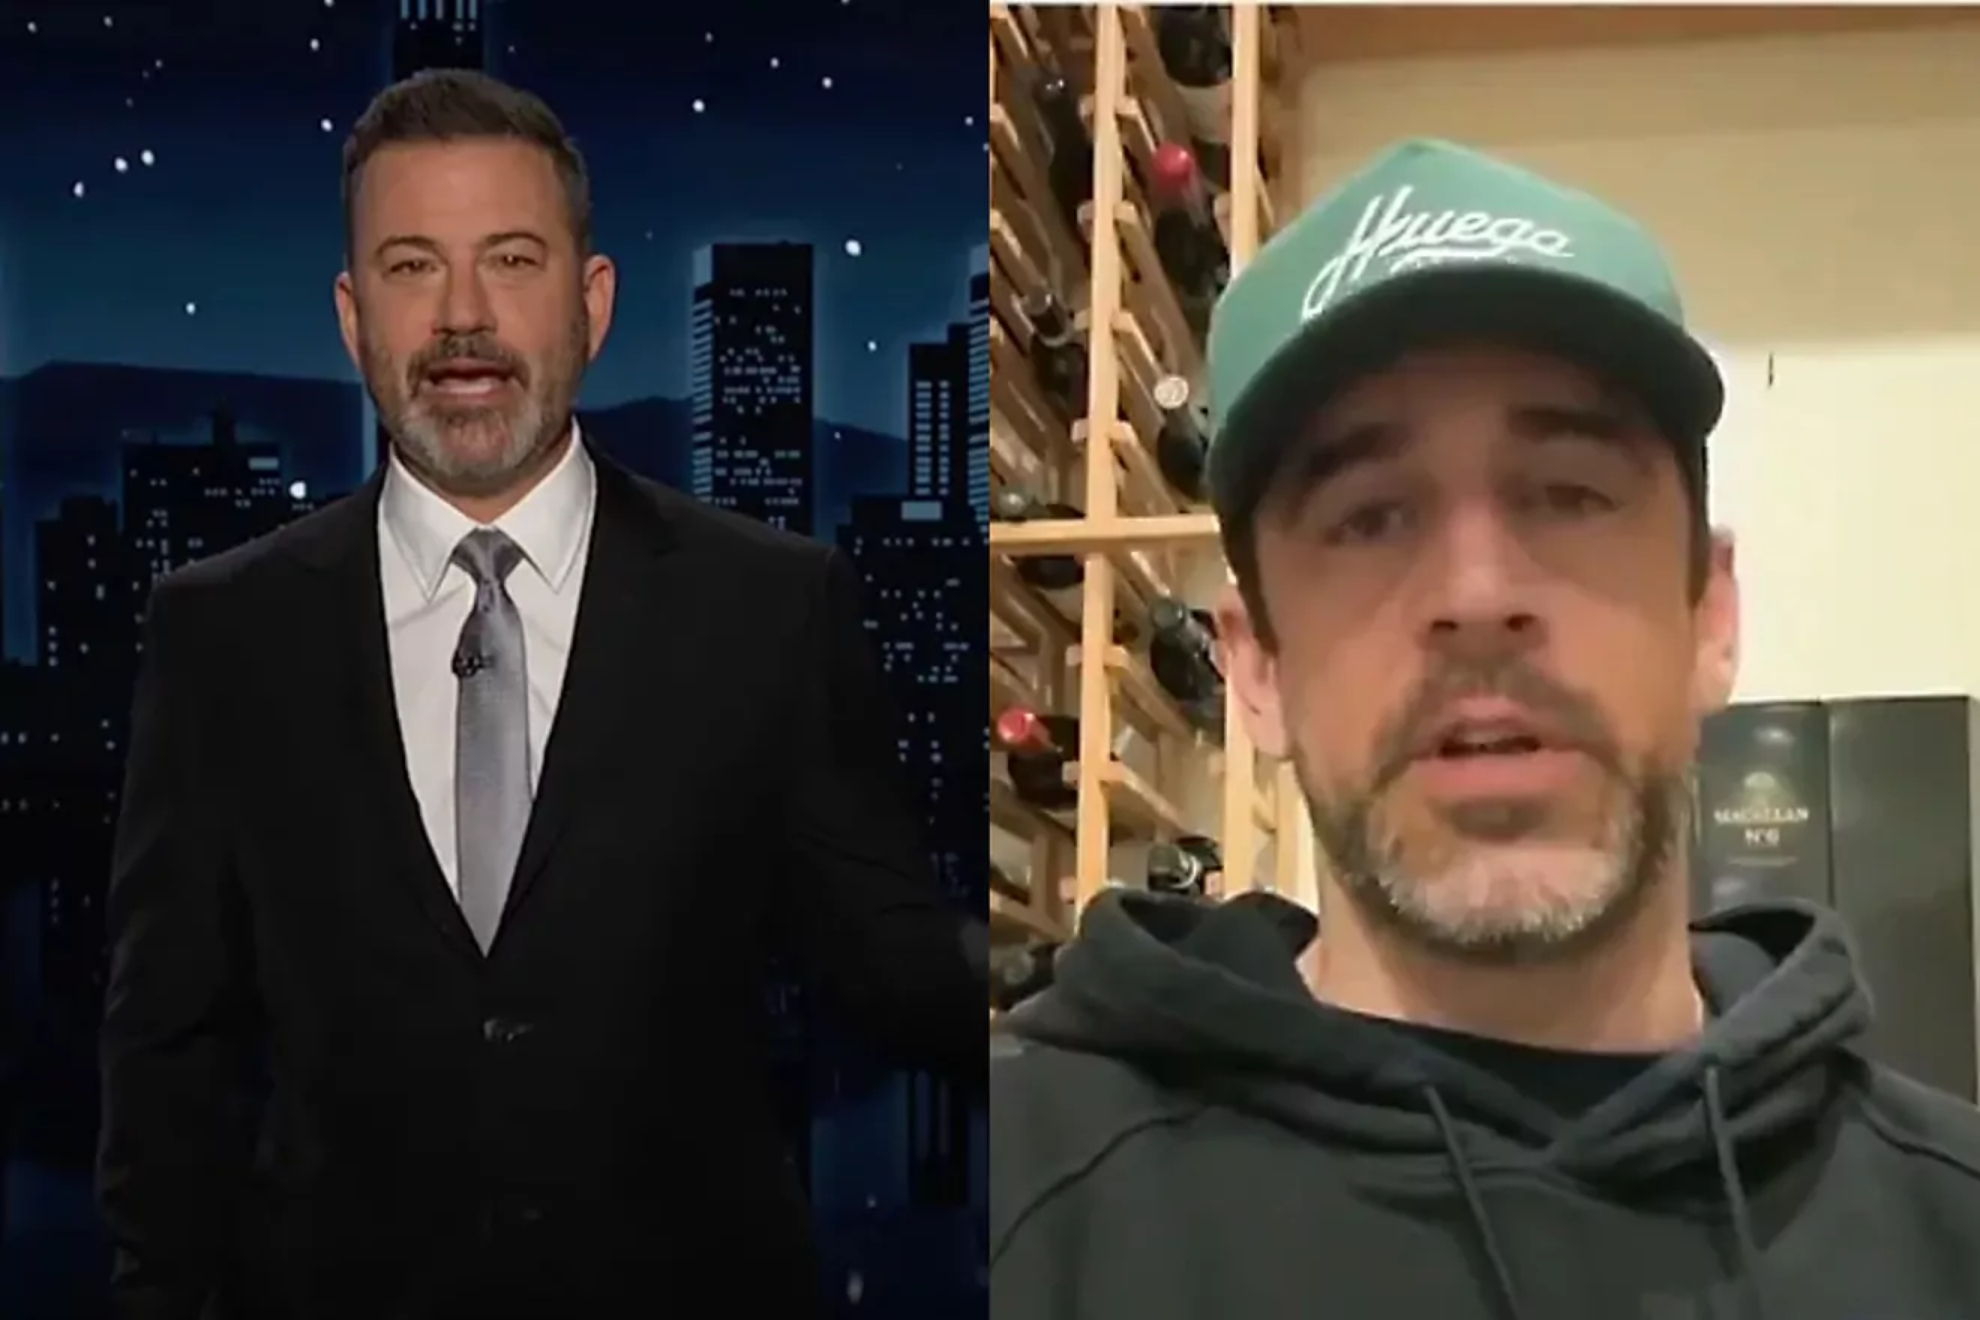 Mashup image of Jimmy Kimmel and Aaron Rodgers